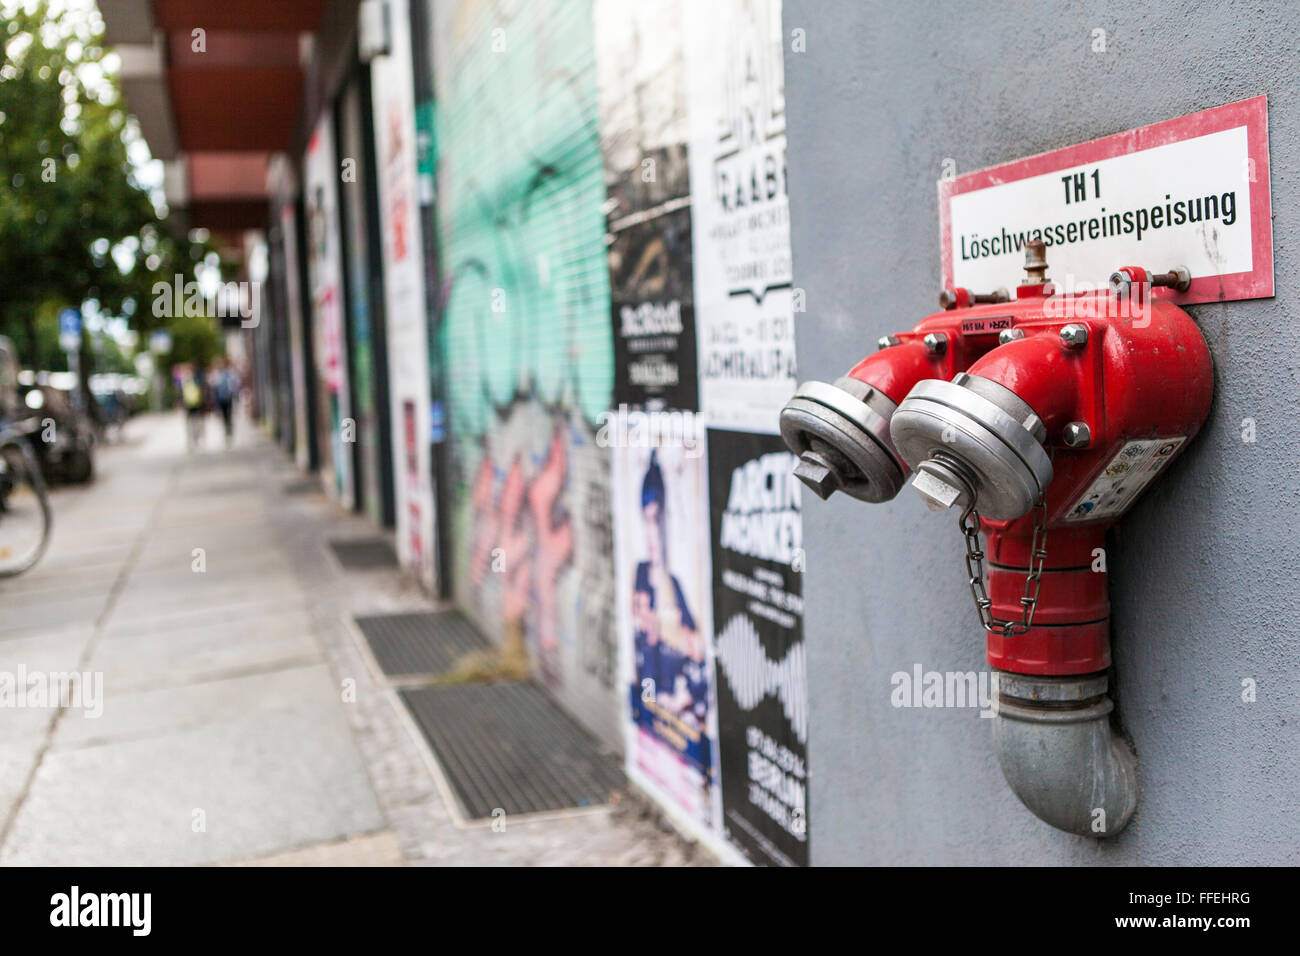 Fire hydrant on wall Stock Photo